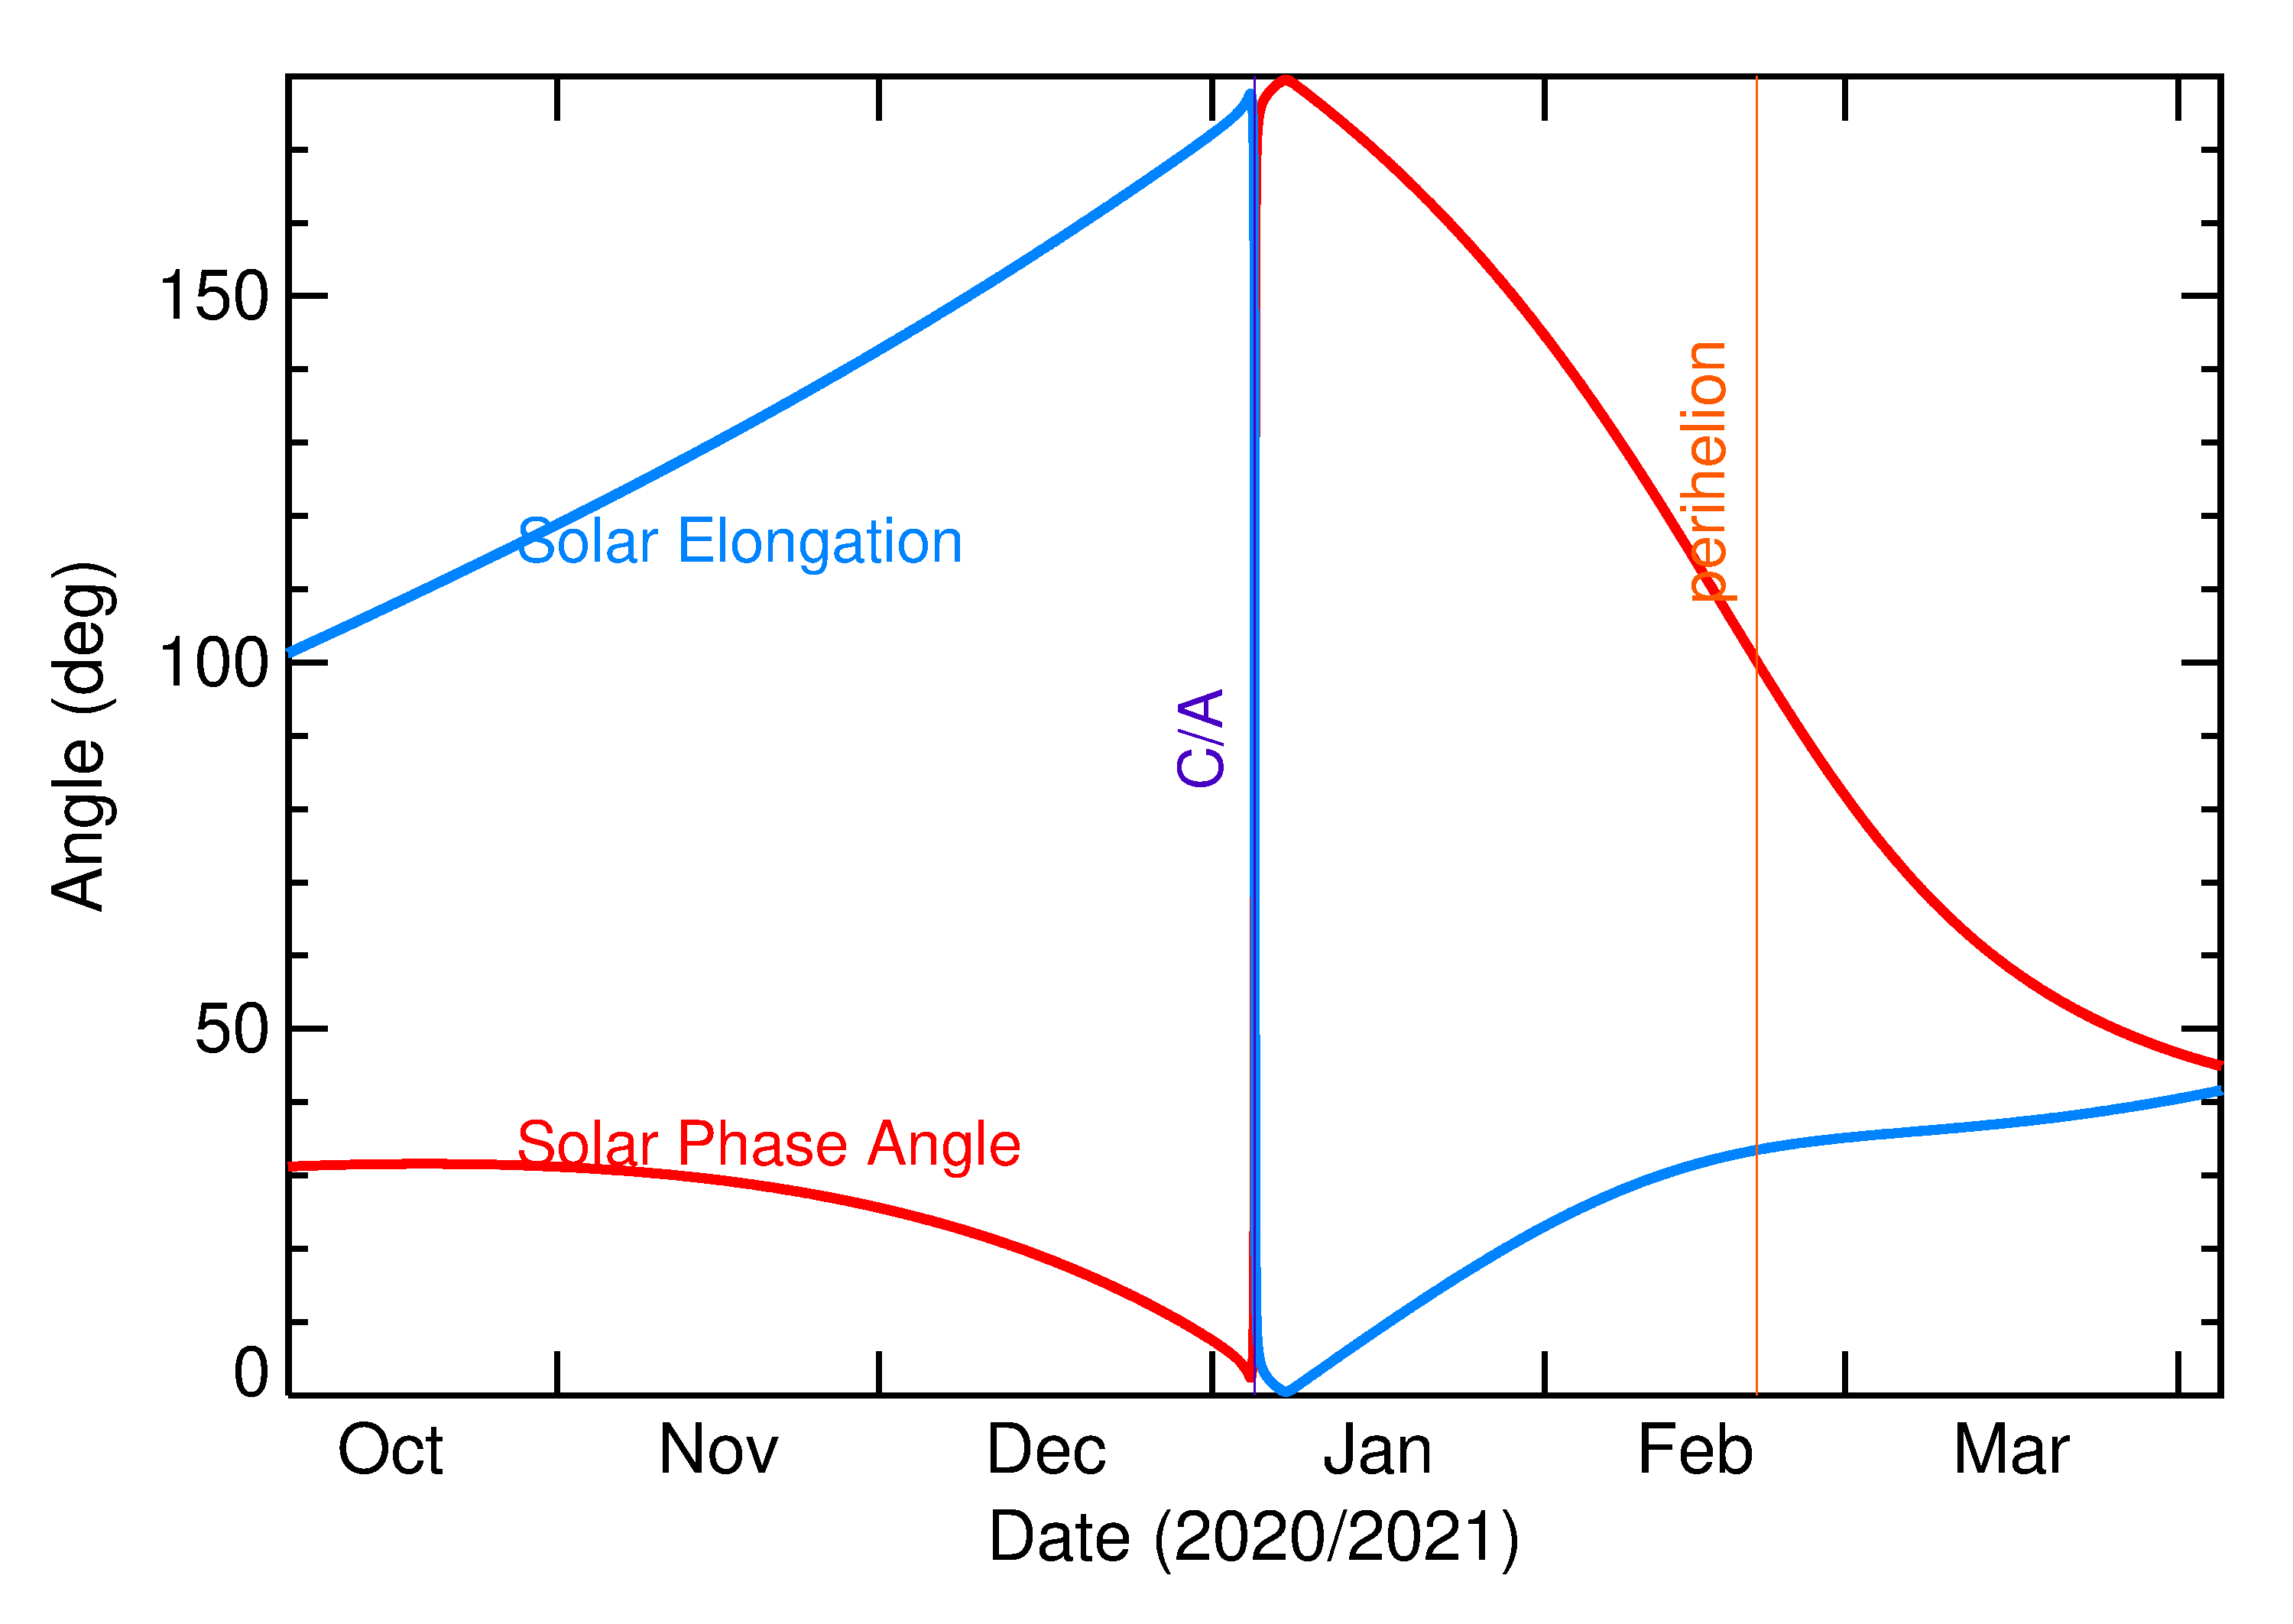 Solar Elongation and Solar Phase Angle of 2021 AH in the months around closest approach